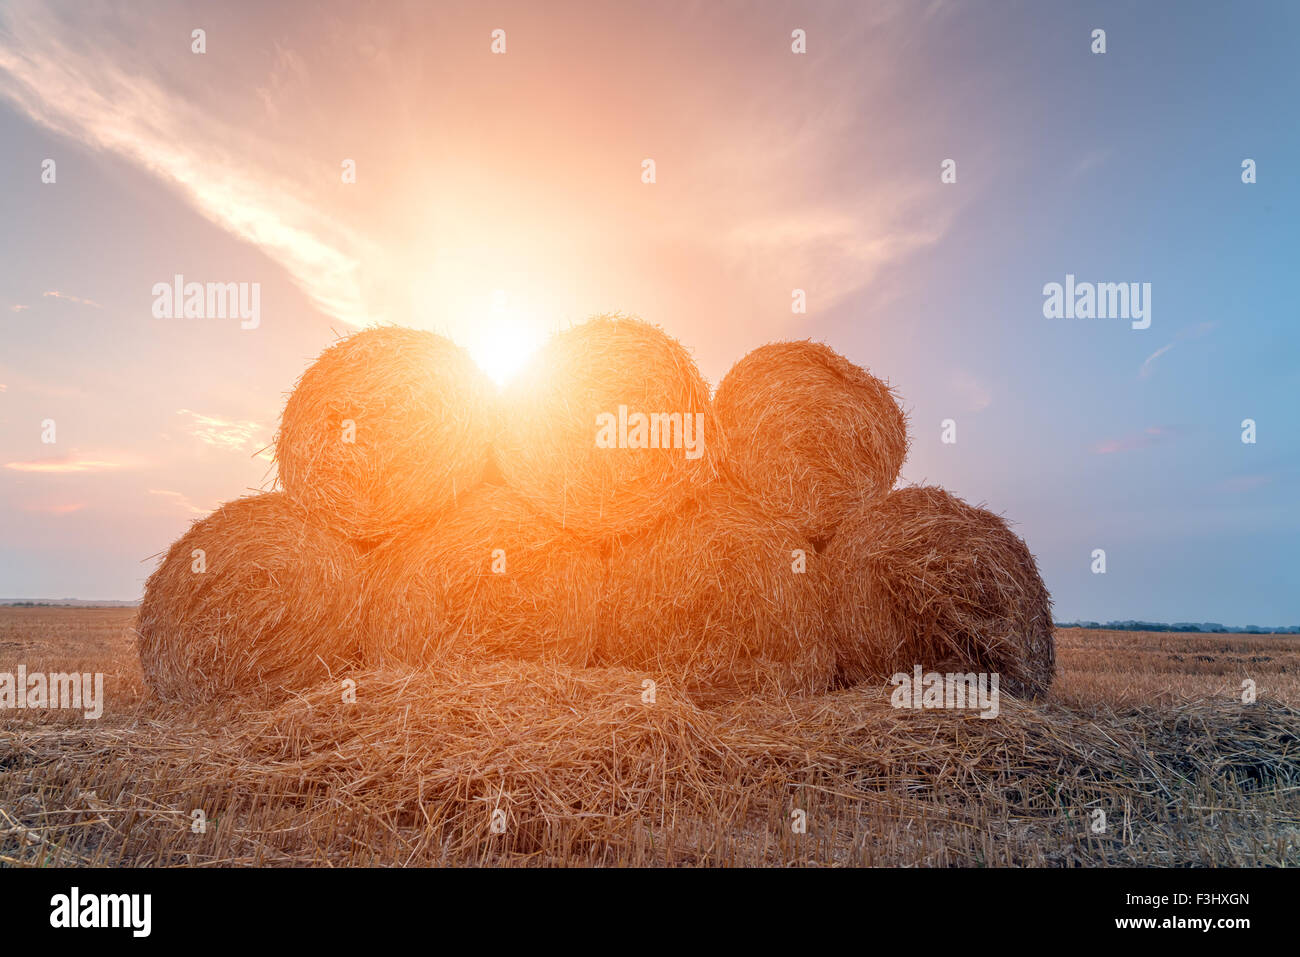 Amazing rural scene on autumn field with straw roles and dramatic evening light. Stock Photo